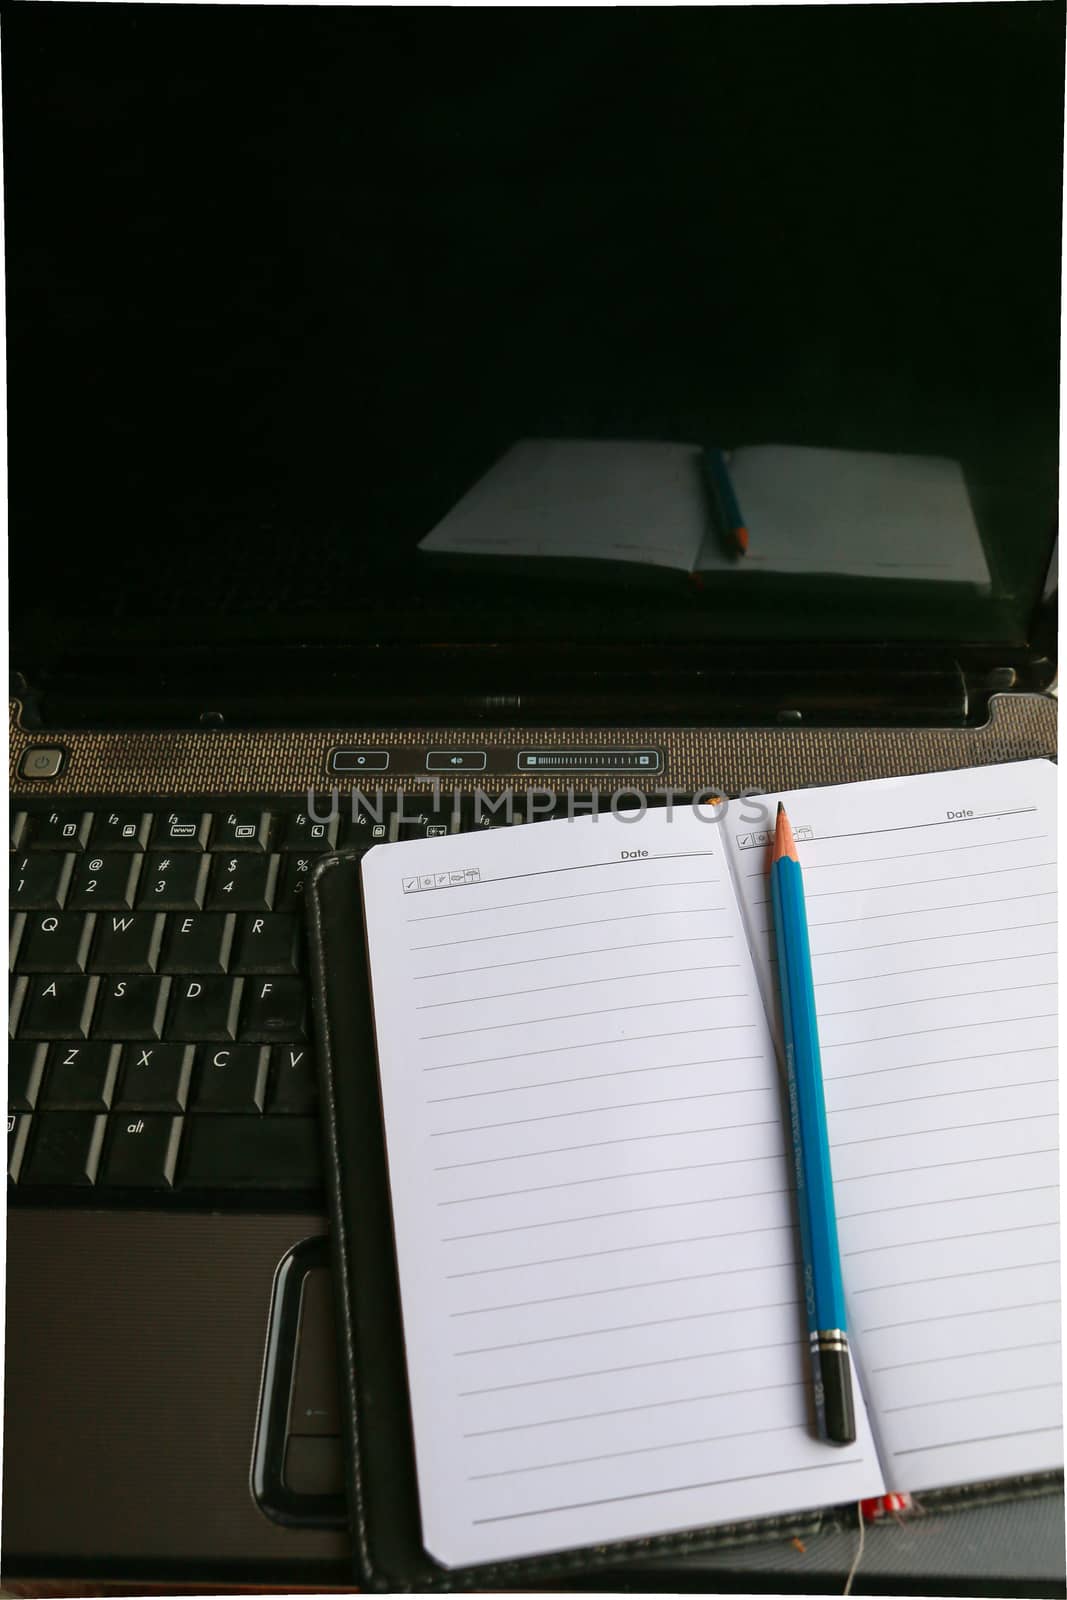 There are writing tools on the keyboard of computer laptop to prepare for work.